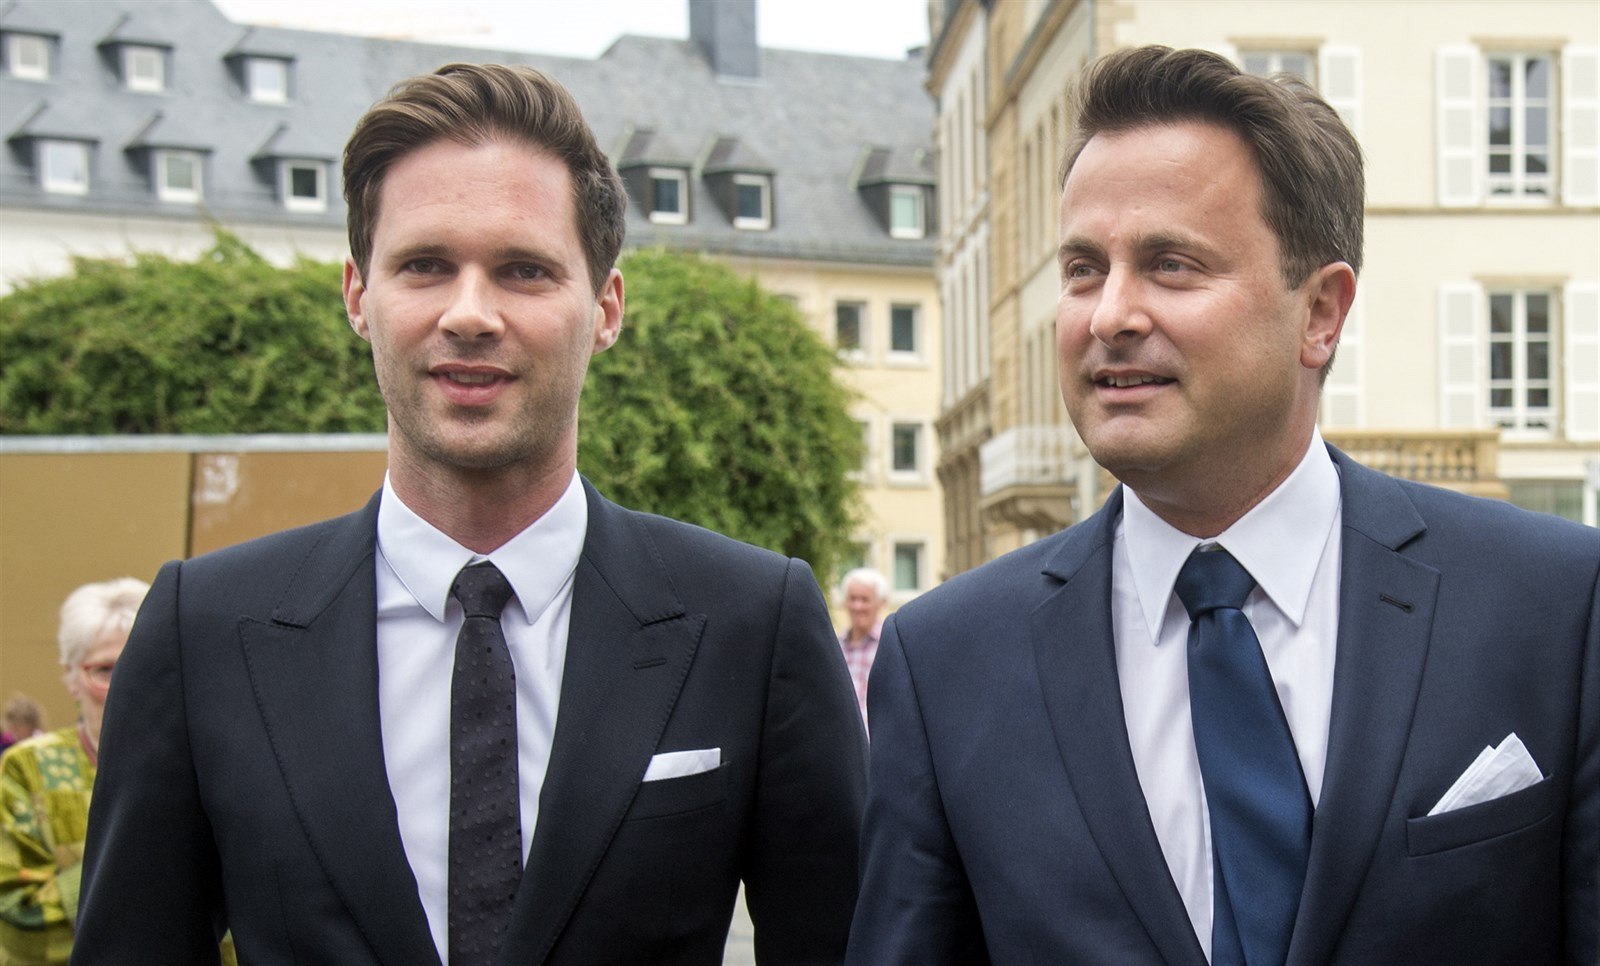 Out Prime Minister Of Luxembourg Marries His Partner Outinperth Lgbtqia News And Culture